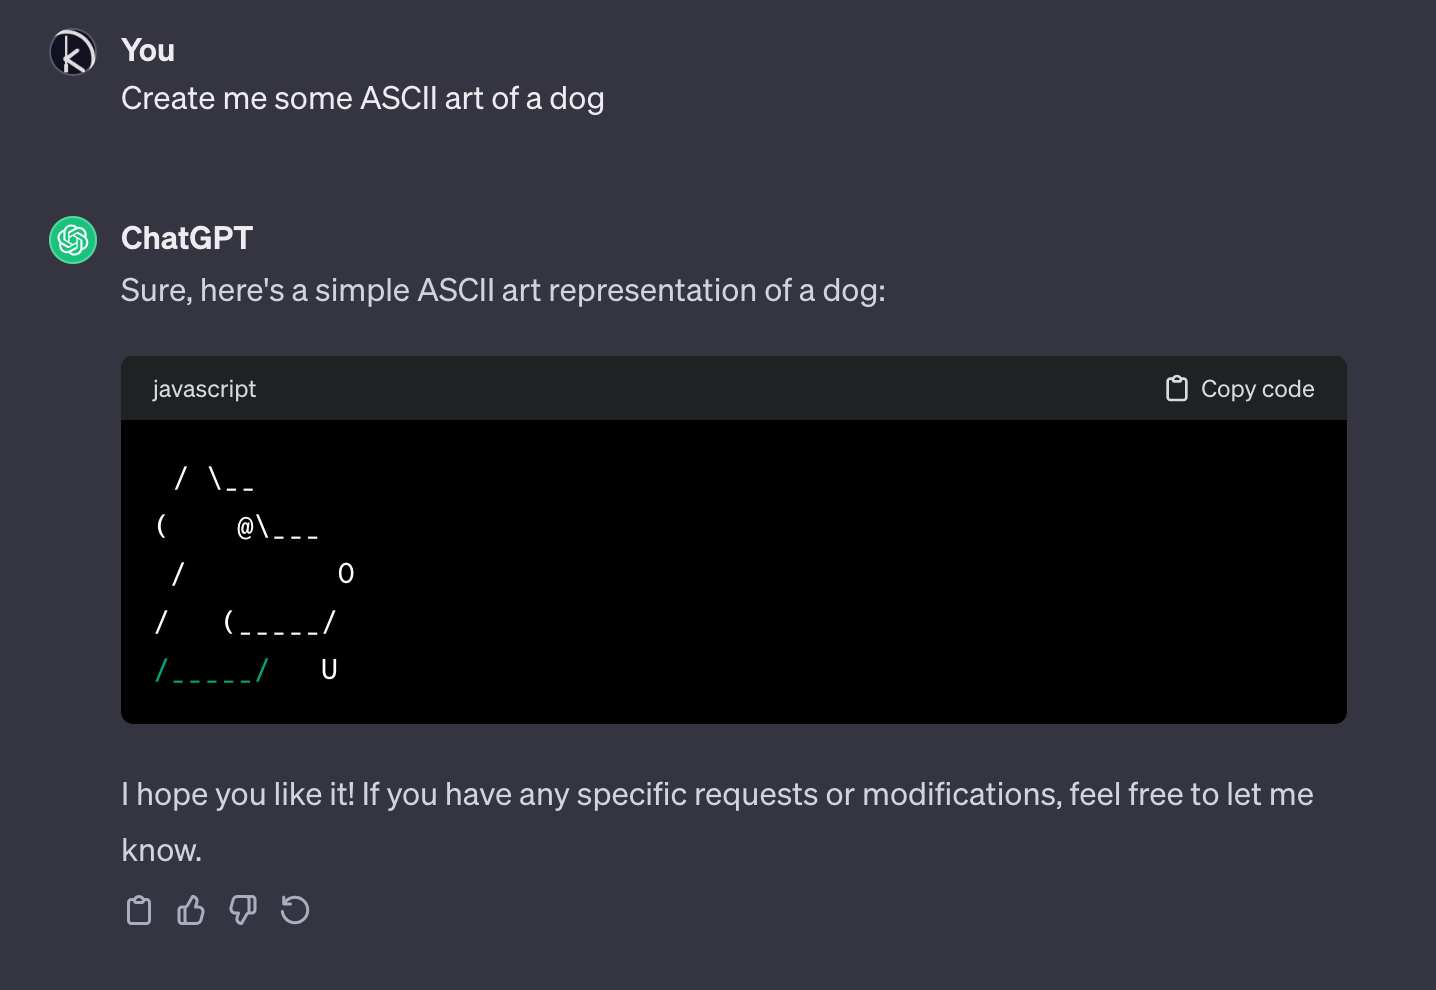 A snippet of a conversation with ChatGPT where I ask it to generate ASCII art of a dog. It replies with a surprisingly decent rendition of a dog's head in profile made up of slashes, dashes, and an @ sign.